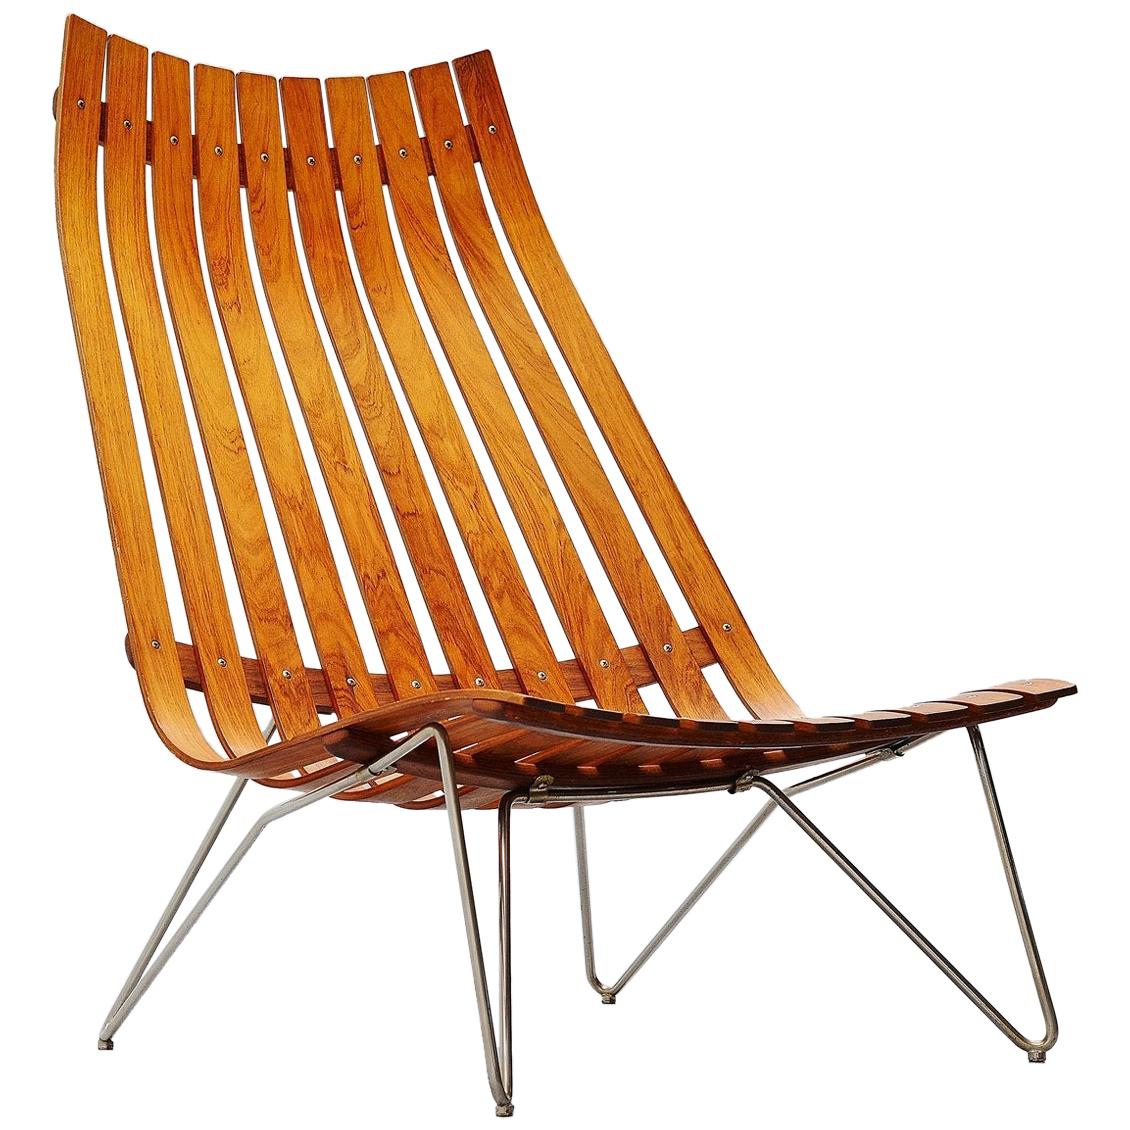 Hans Brattrud Scandia Lounge Chair Hove Mobler Norway, 1957